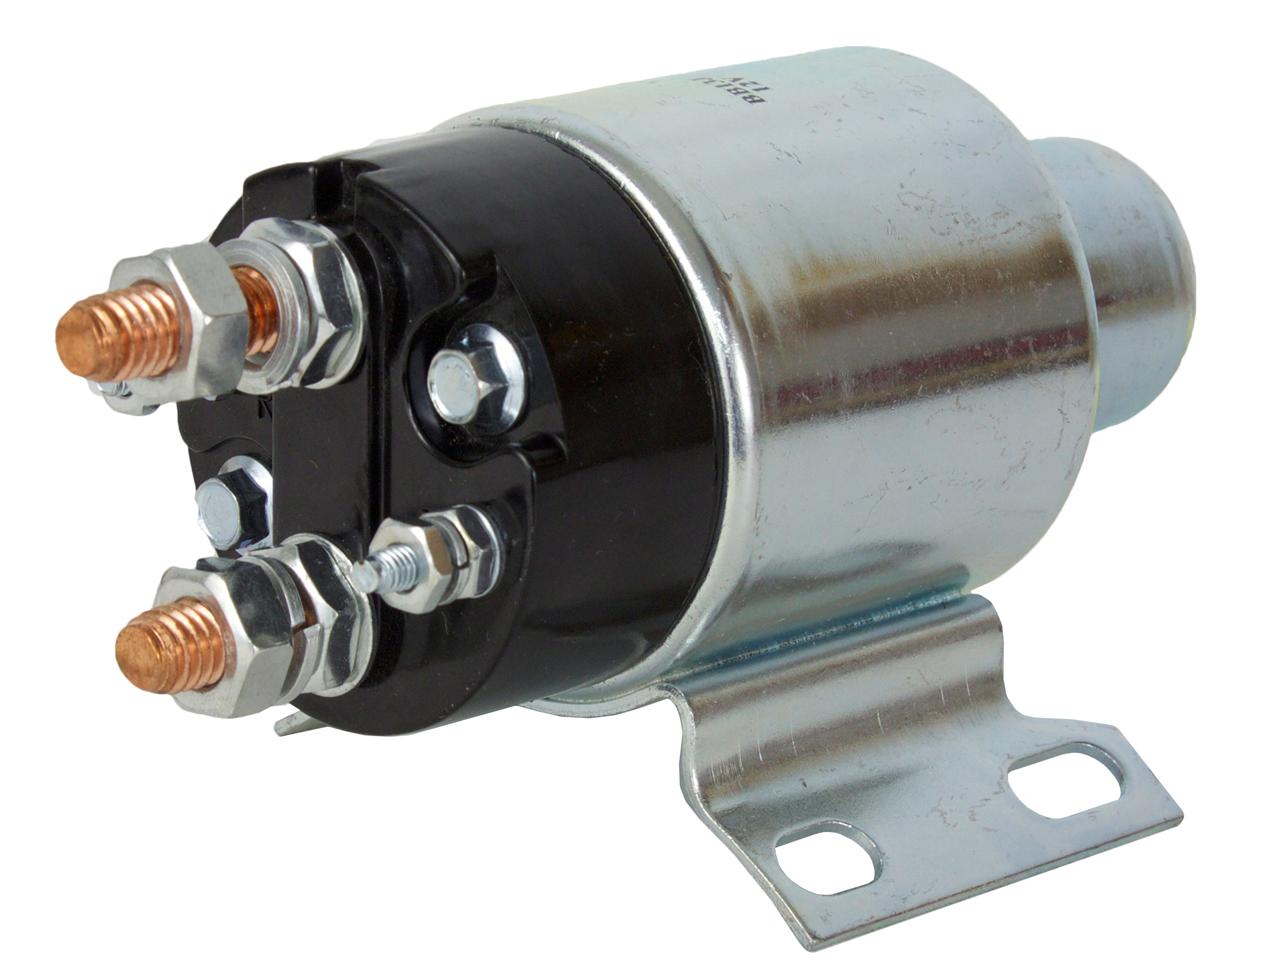 Rareelectrical NEW STARTER SOLENOID COMPATIBLE WITH CLARK TRACTOR SHOVEL 35C PERKINS 4-248 DIESEL 1975-1984